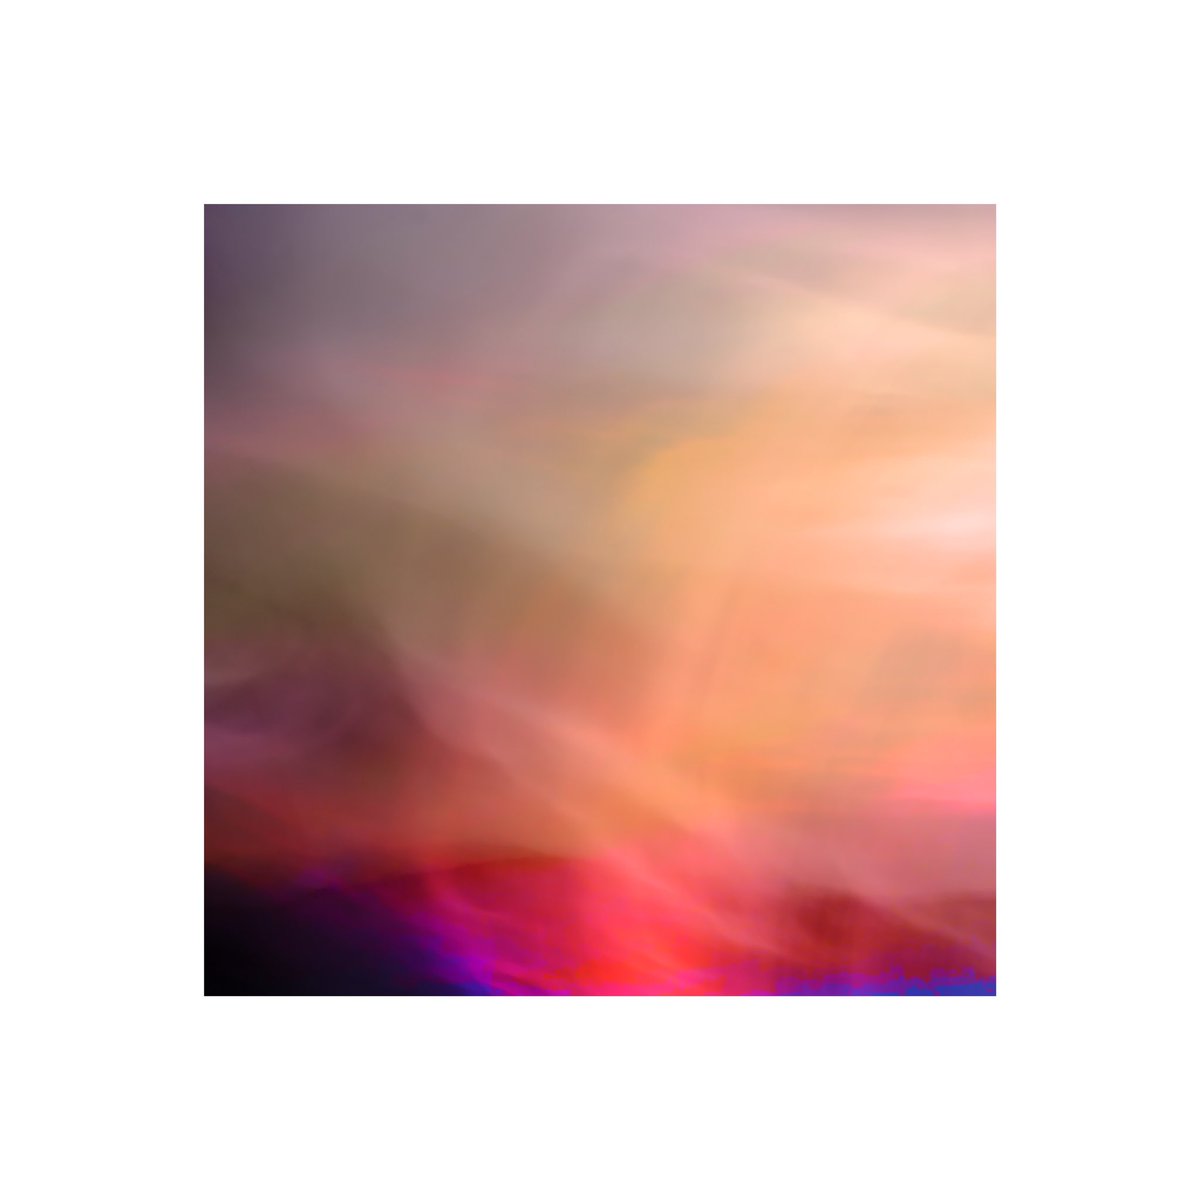 Day 178 365 days of ICM photography 
 #icmphotography #icm #intentionalcameramovement #abstractphotography #abstract #icmphoto #icmphotomag #impressionistphotography #bluronpurpose #camerapainting #fieldrecording #audiophotography #365in2023